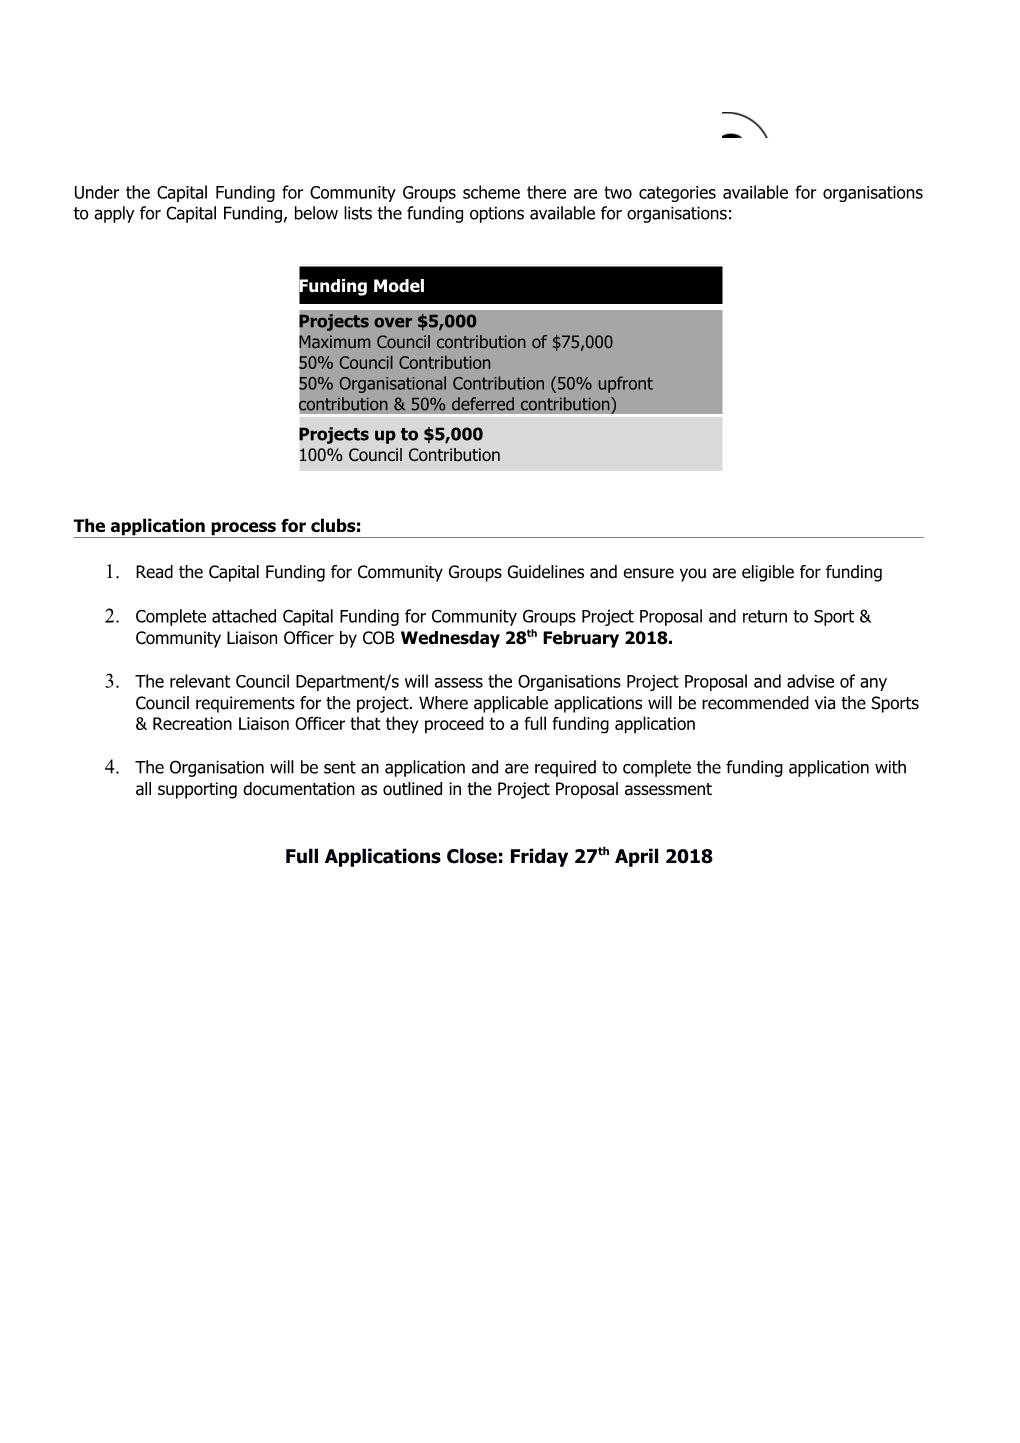 Committee Application Form